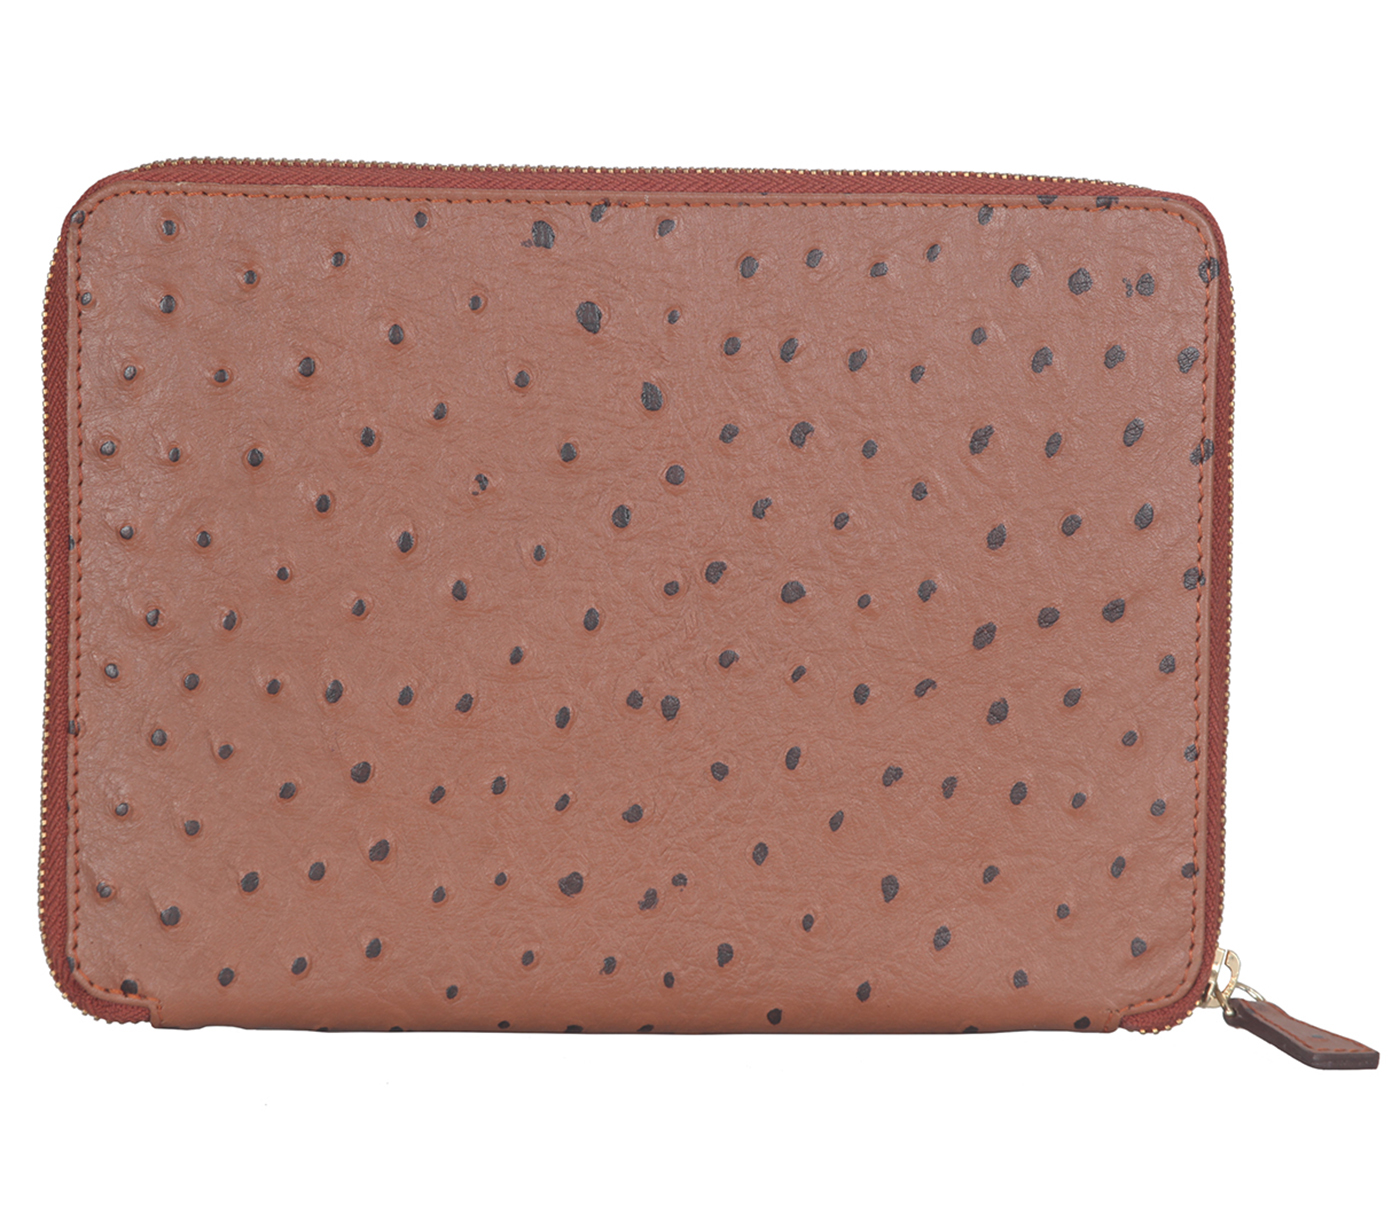 W279--Ipad air cover with magnetic tray in Genuine Leather - Tan